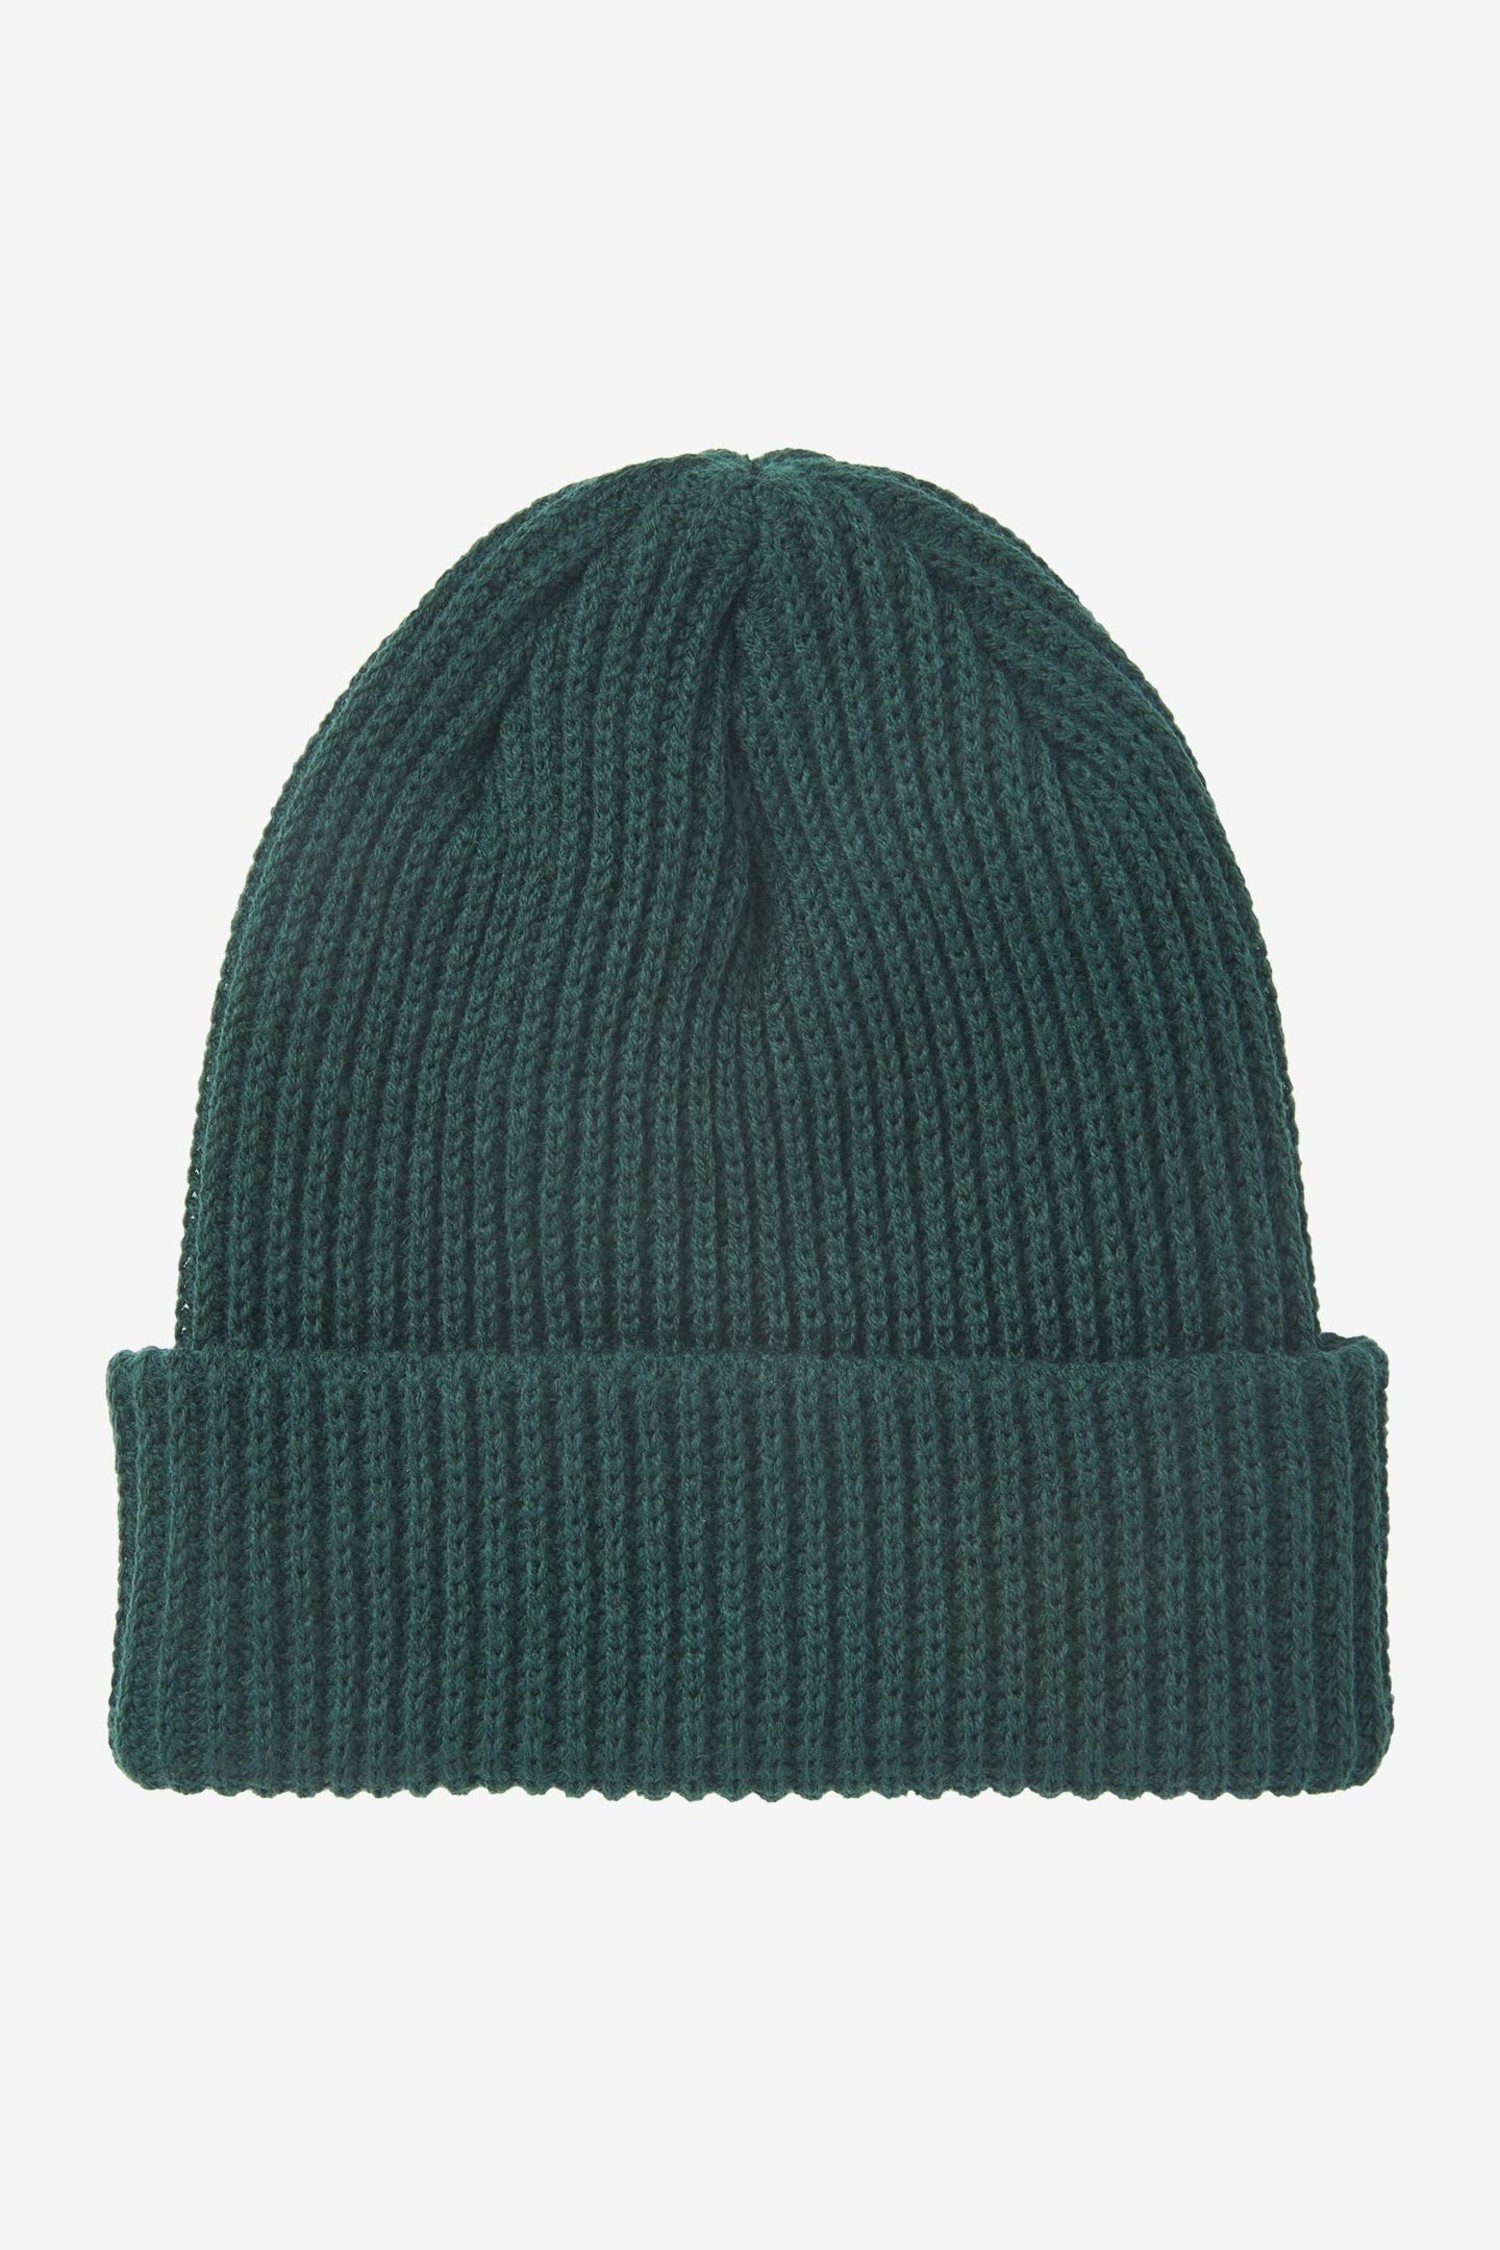 O'Neill Mens Groceries Beanie - Yellow Turtle